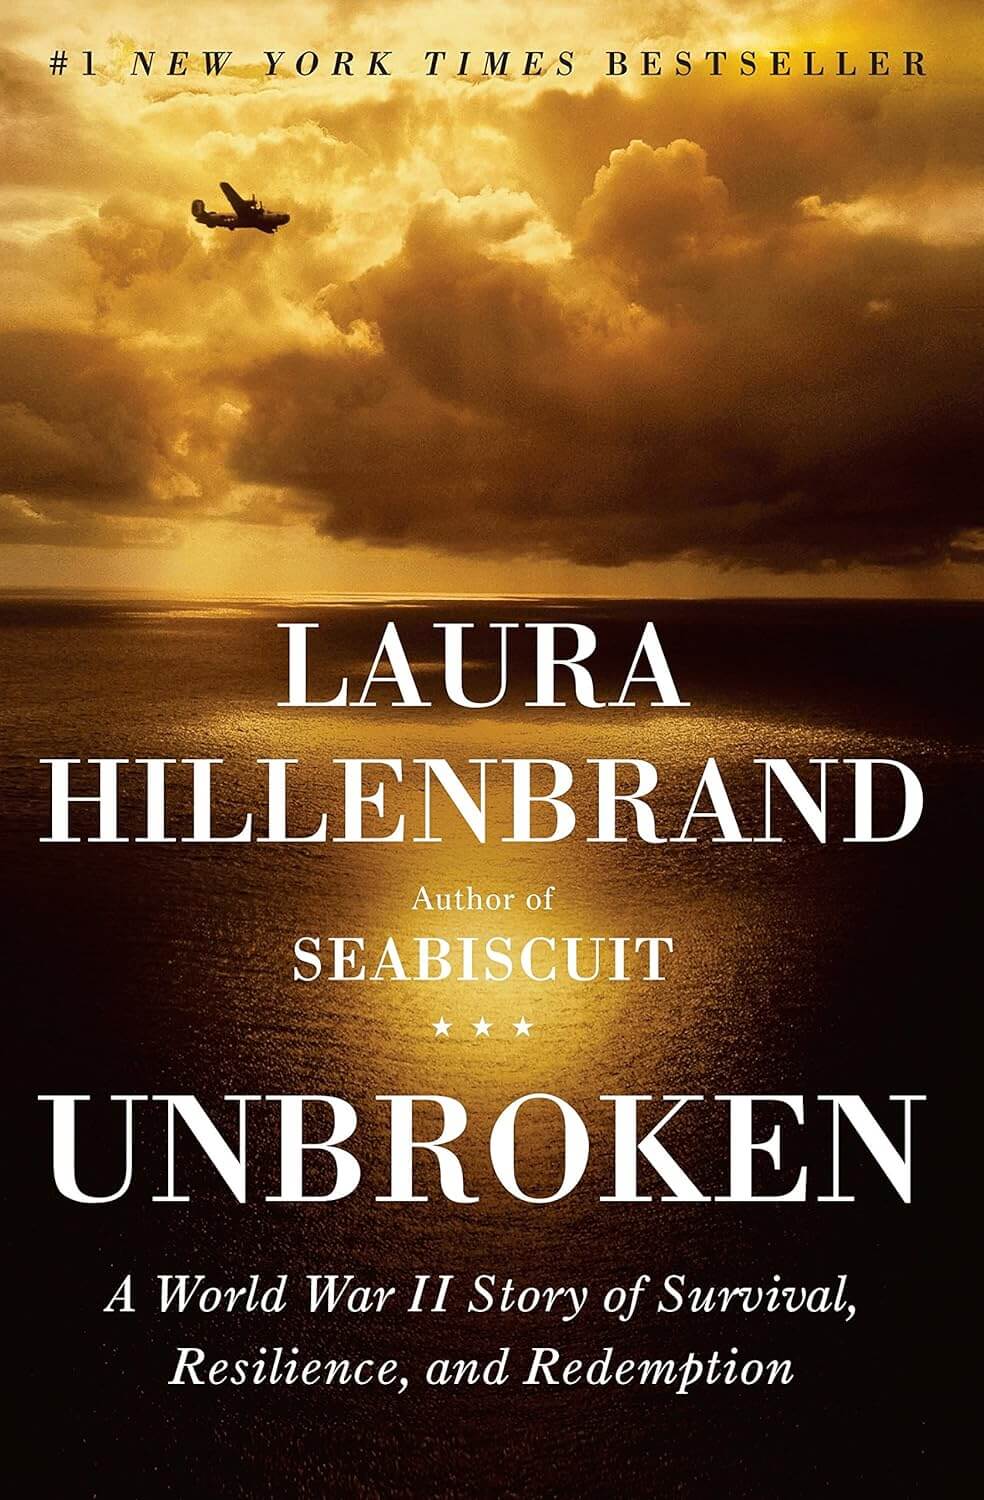 "Unbroken: A World War II Story of Survival, Resilience and Redemption" by Laura Hillenbrand